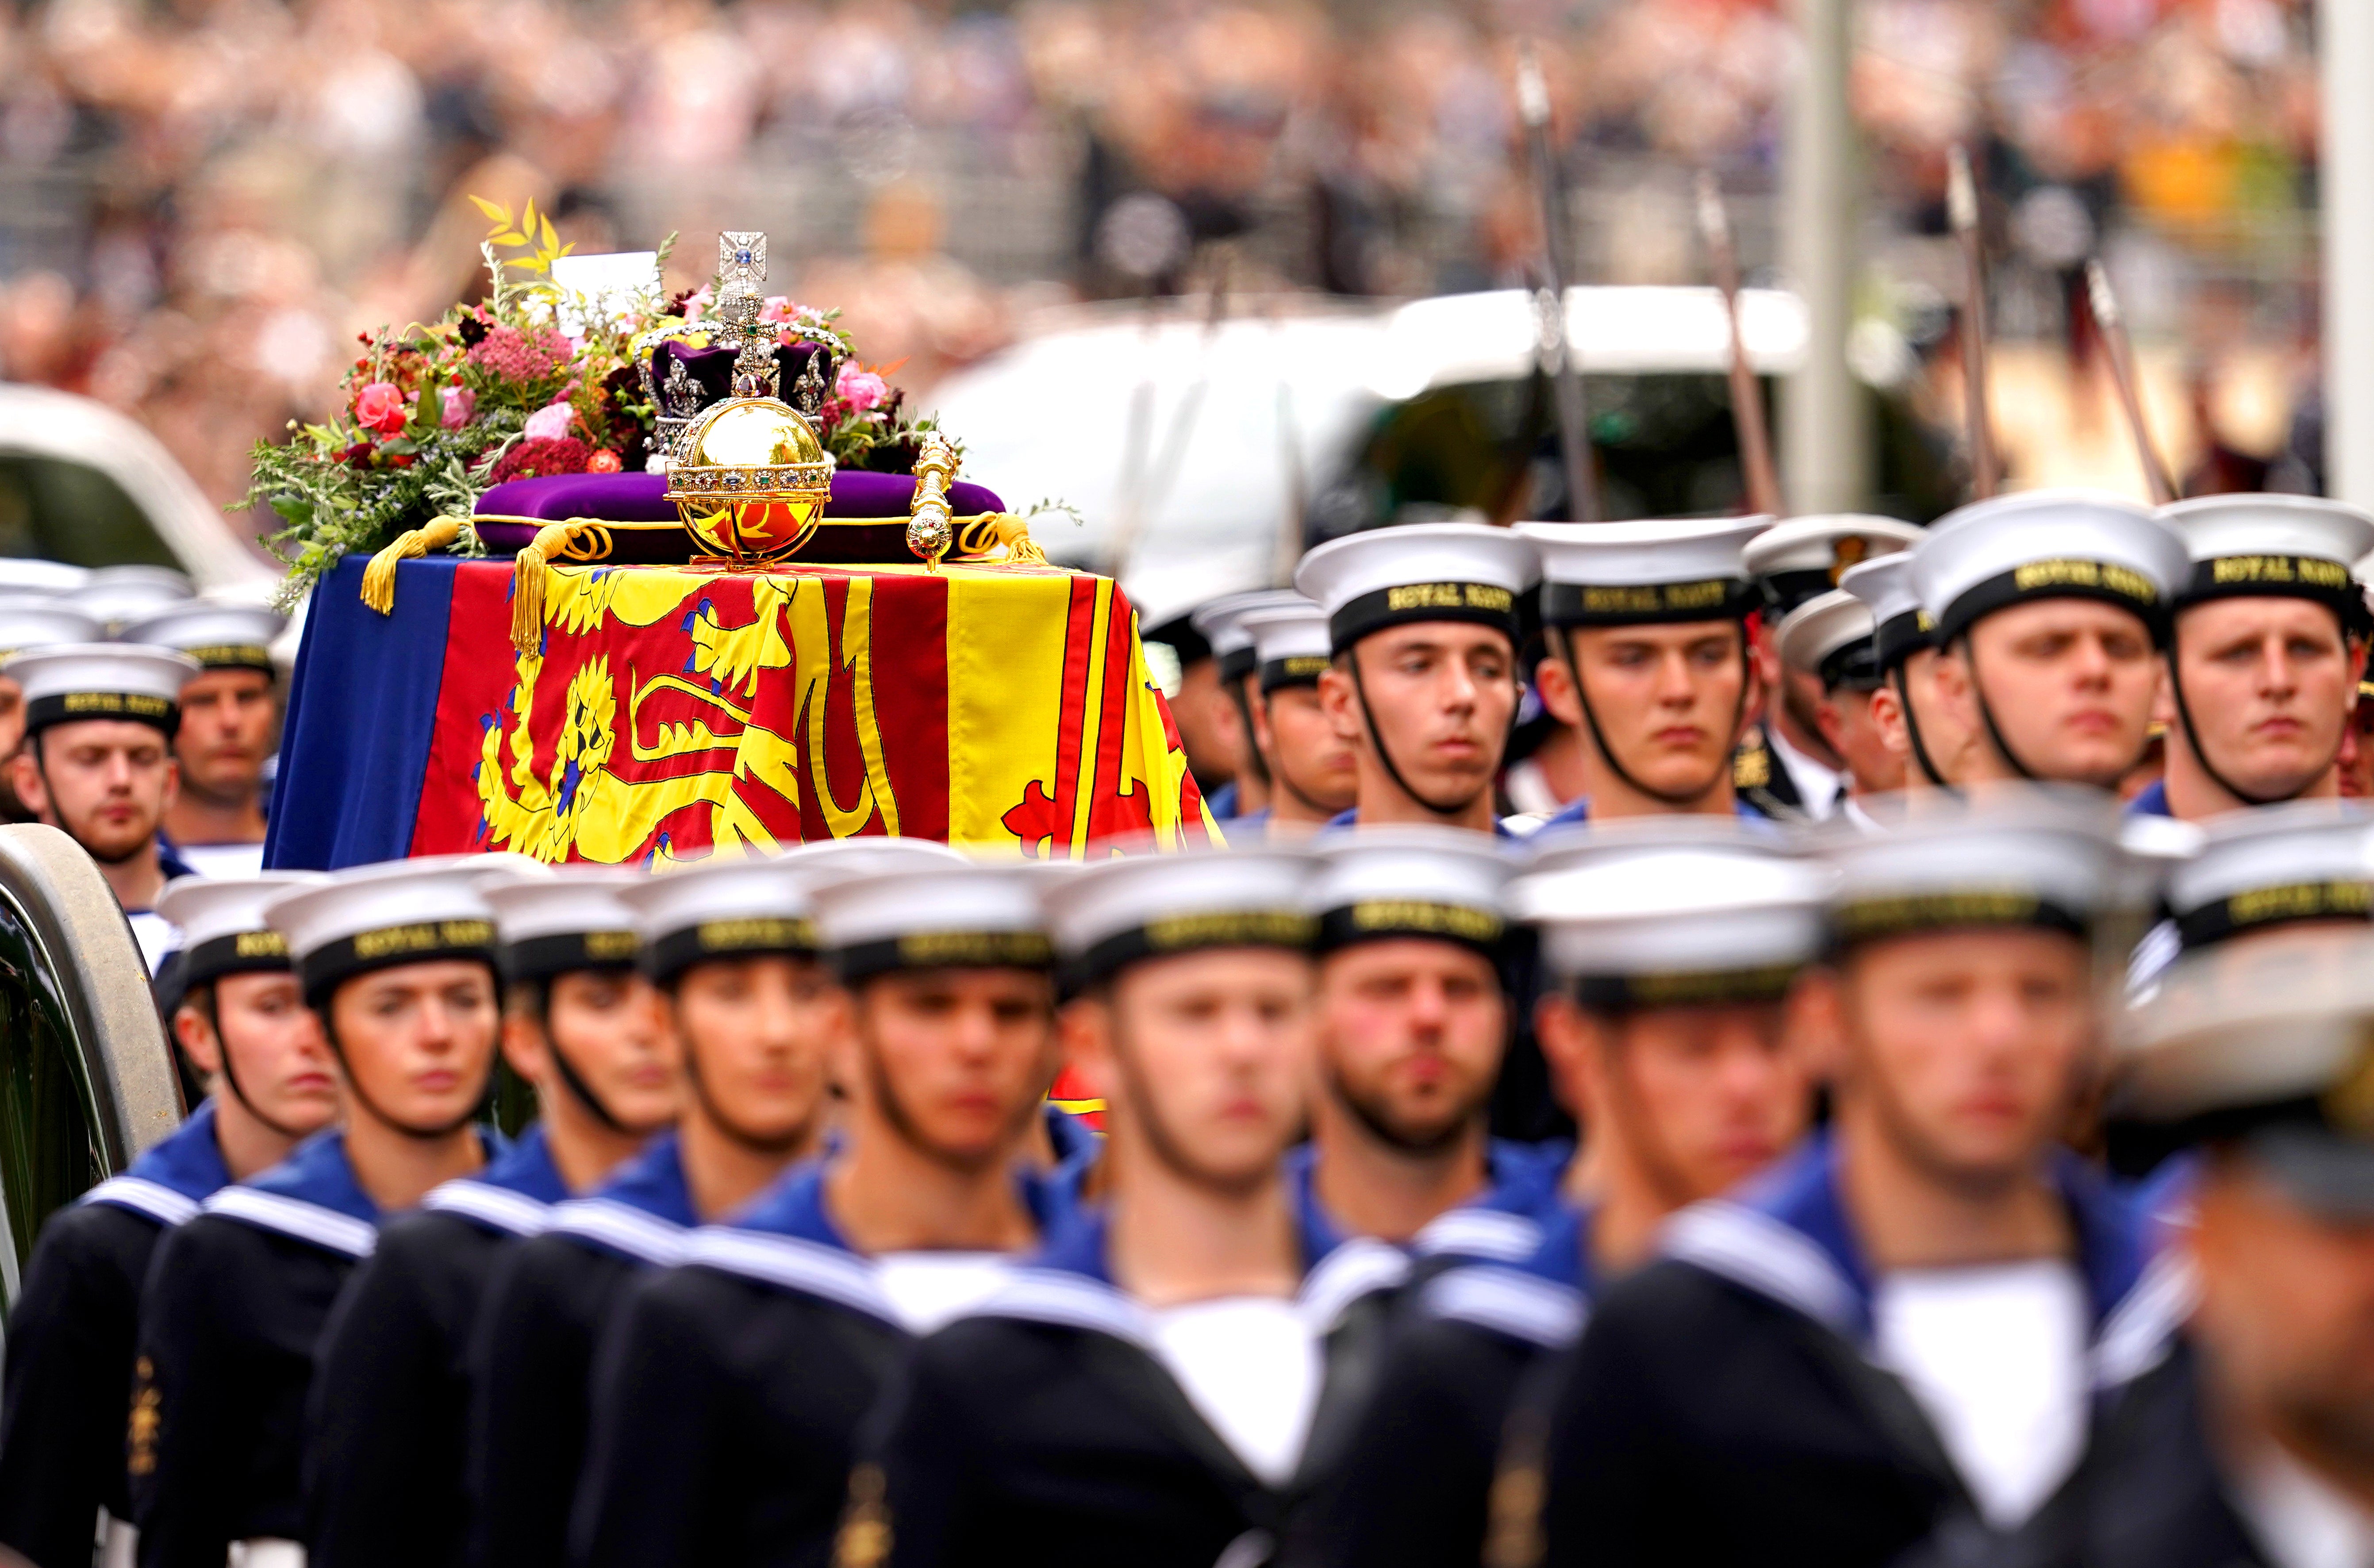 The Queen’s coffin is carried to Westminster Abbey